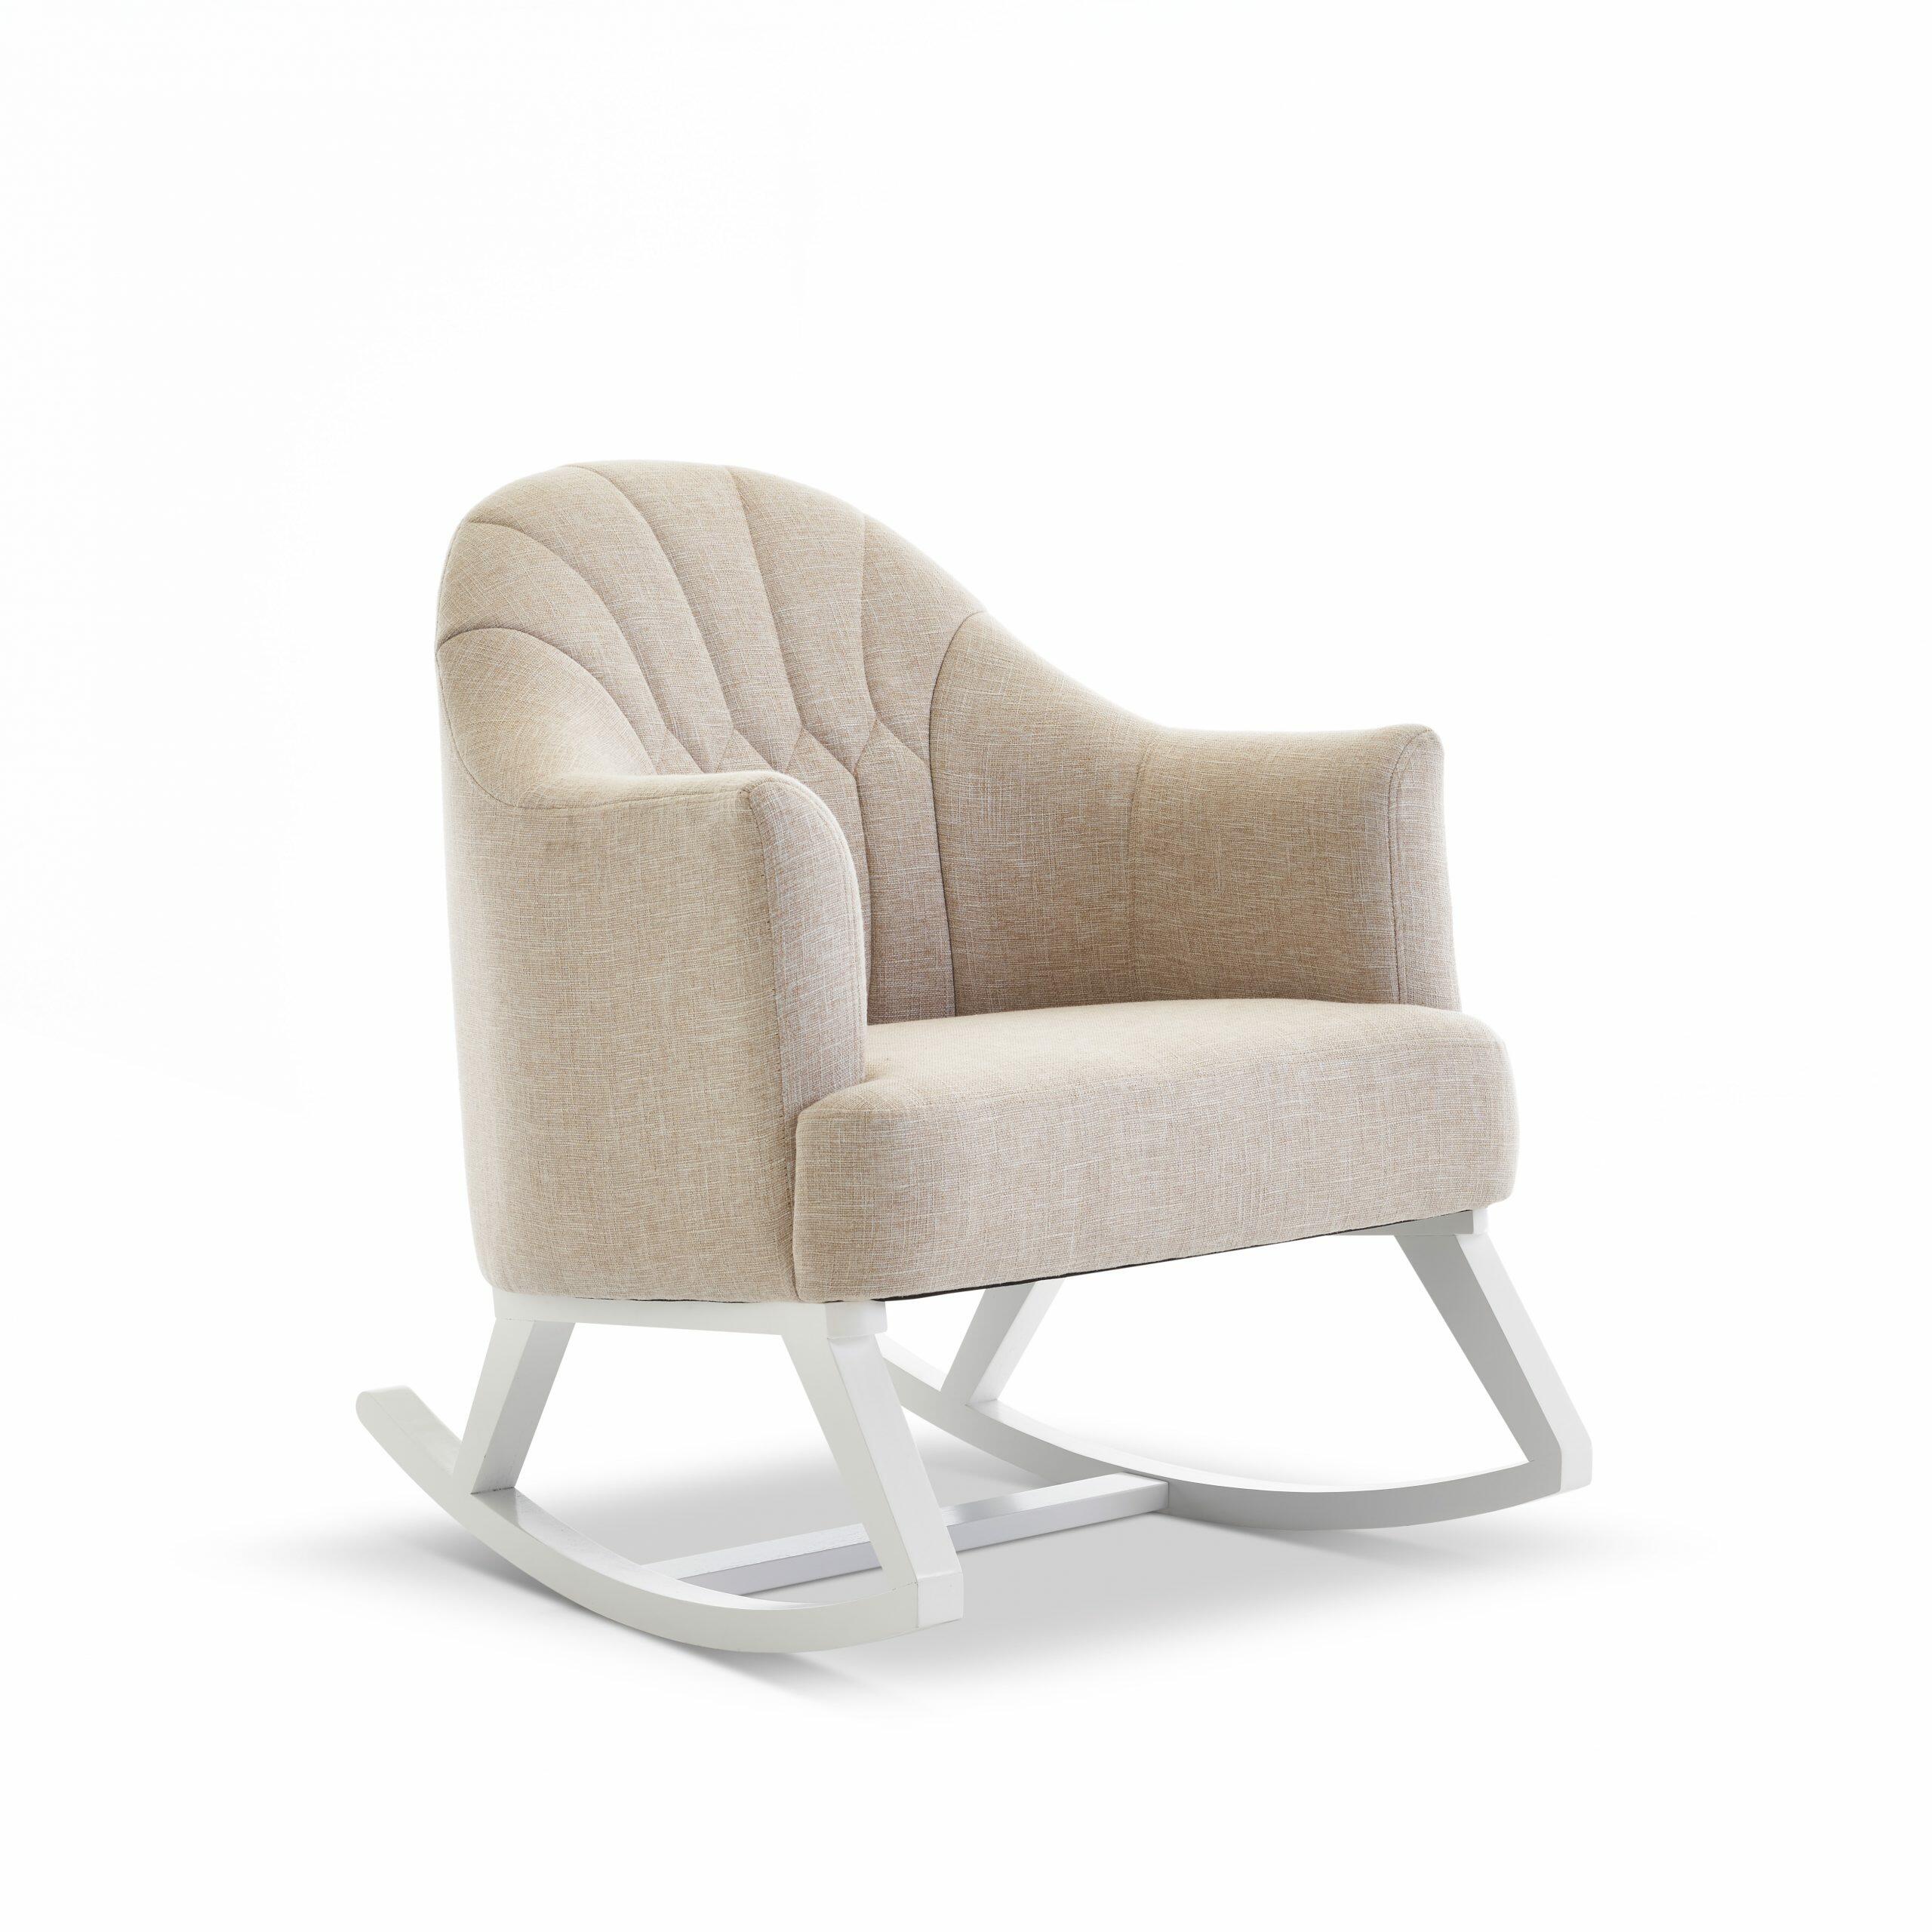 OBaby Round Back Nursery Rocking Chair in Oatmeal